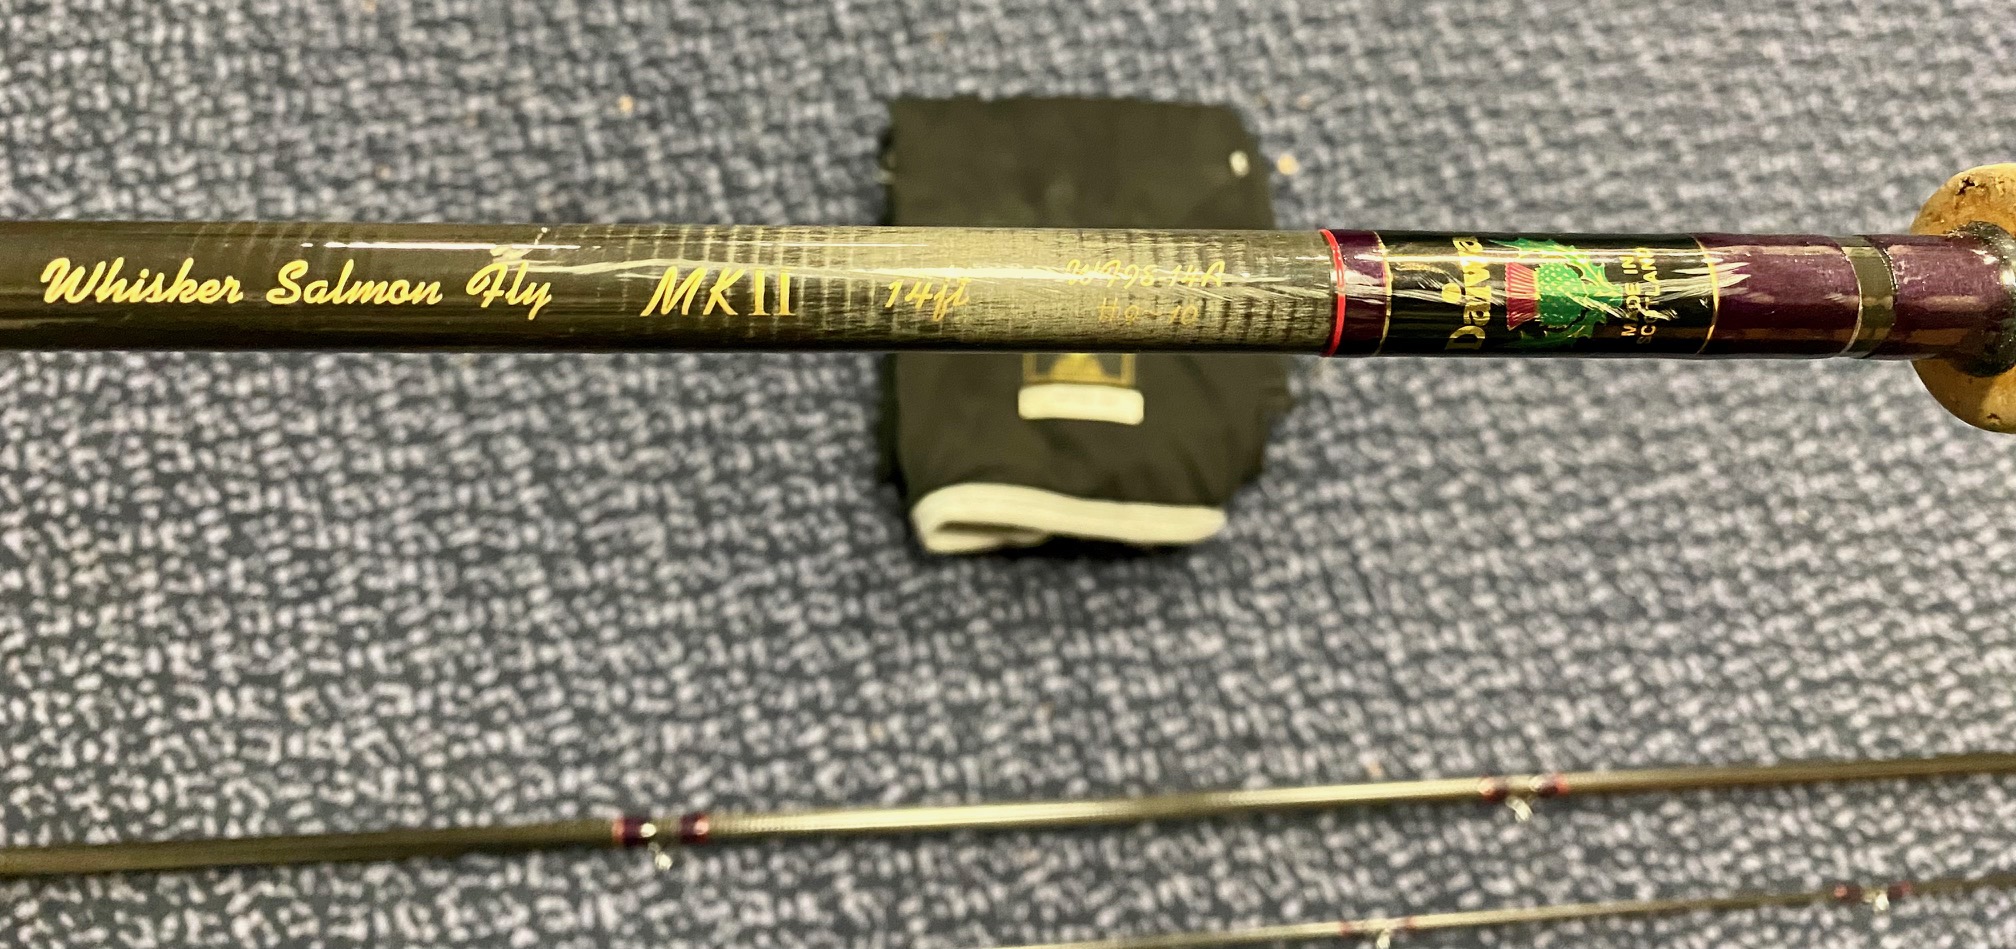 Preloved Daiwa Mark 2 Whisker Salmon Fly 14ft 9/10 3 piece made in